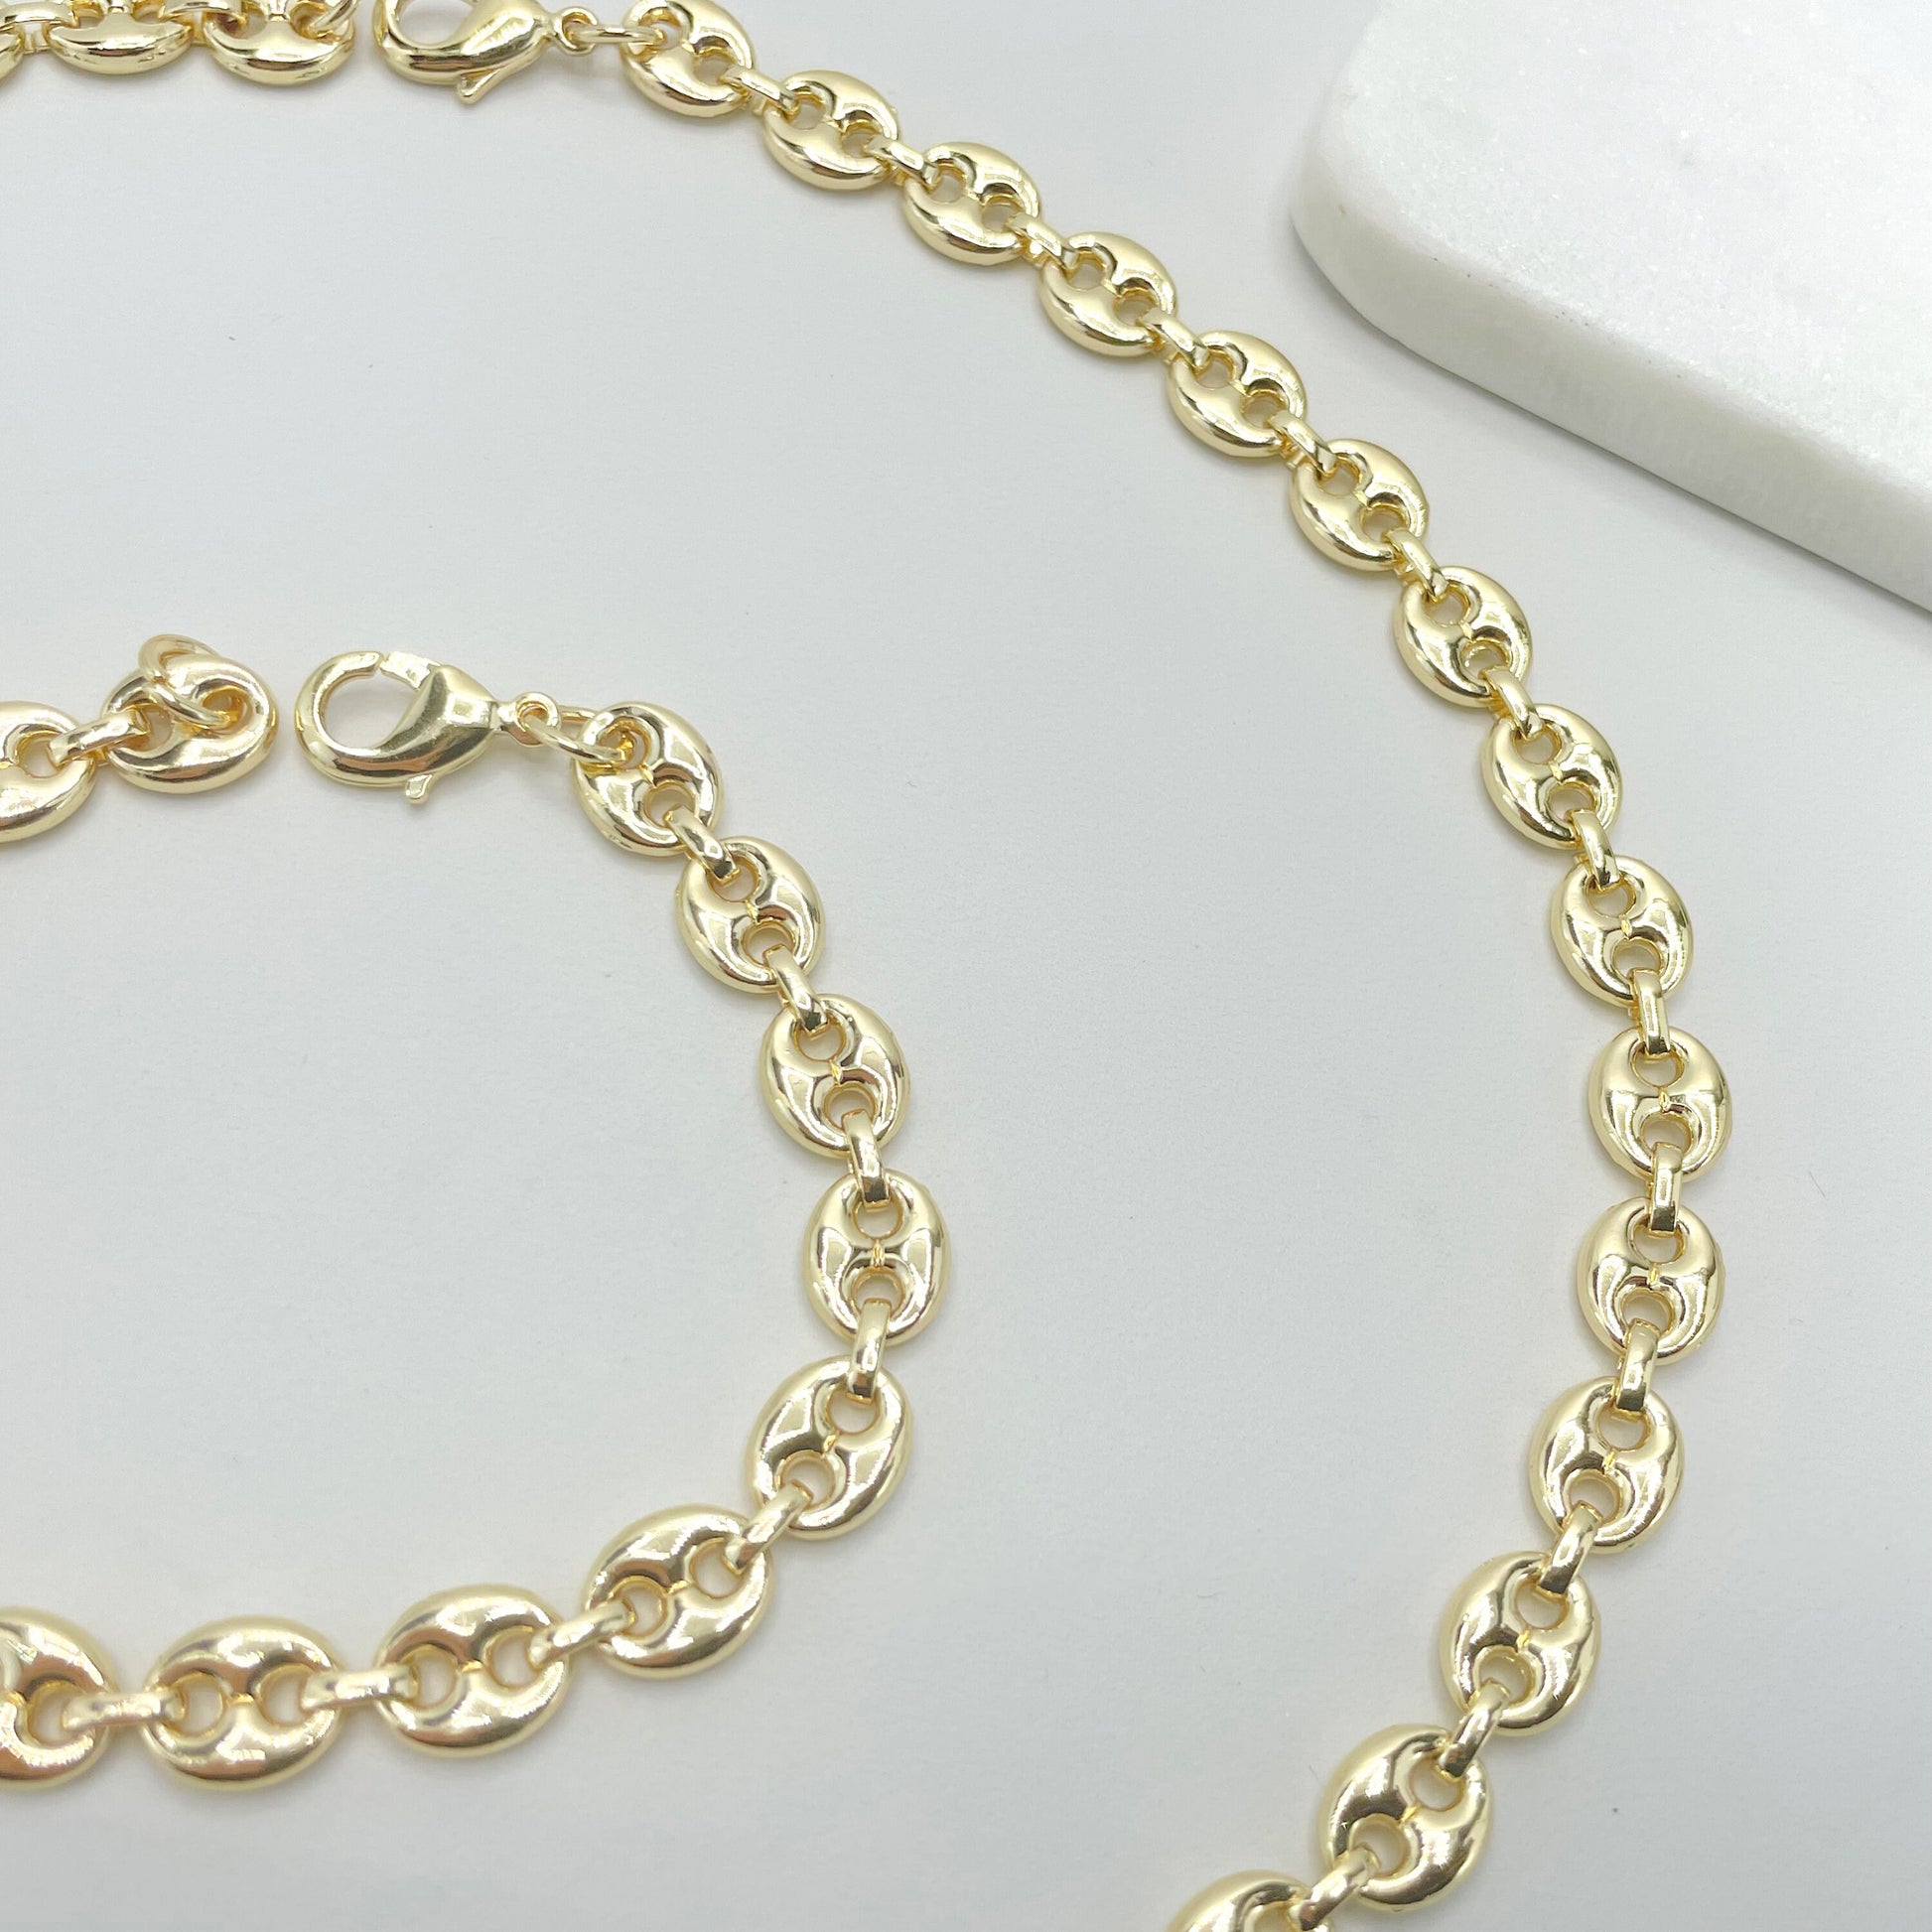 18k Gold Filled 12mm Puffy Mariner Style Link Chain, Necklace or Bracelet, Wholesale Jewelry Making Supplies